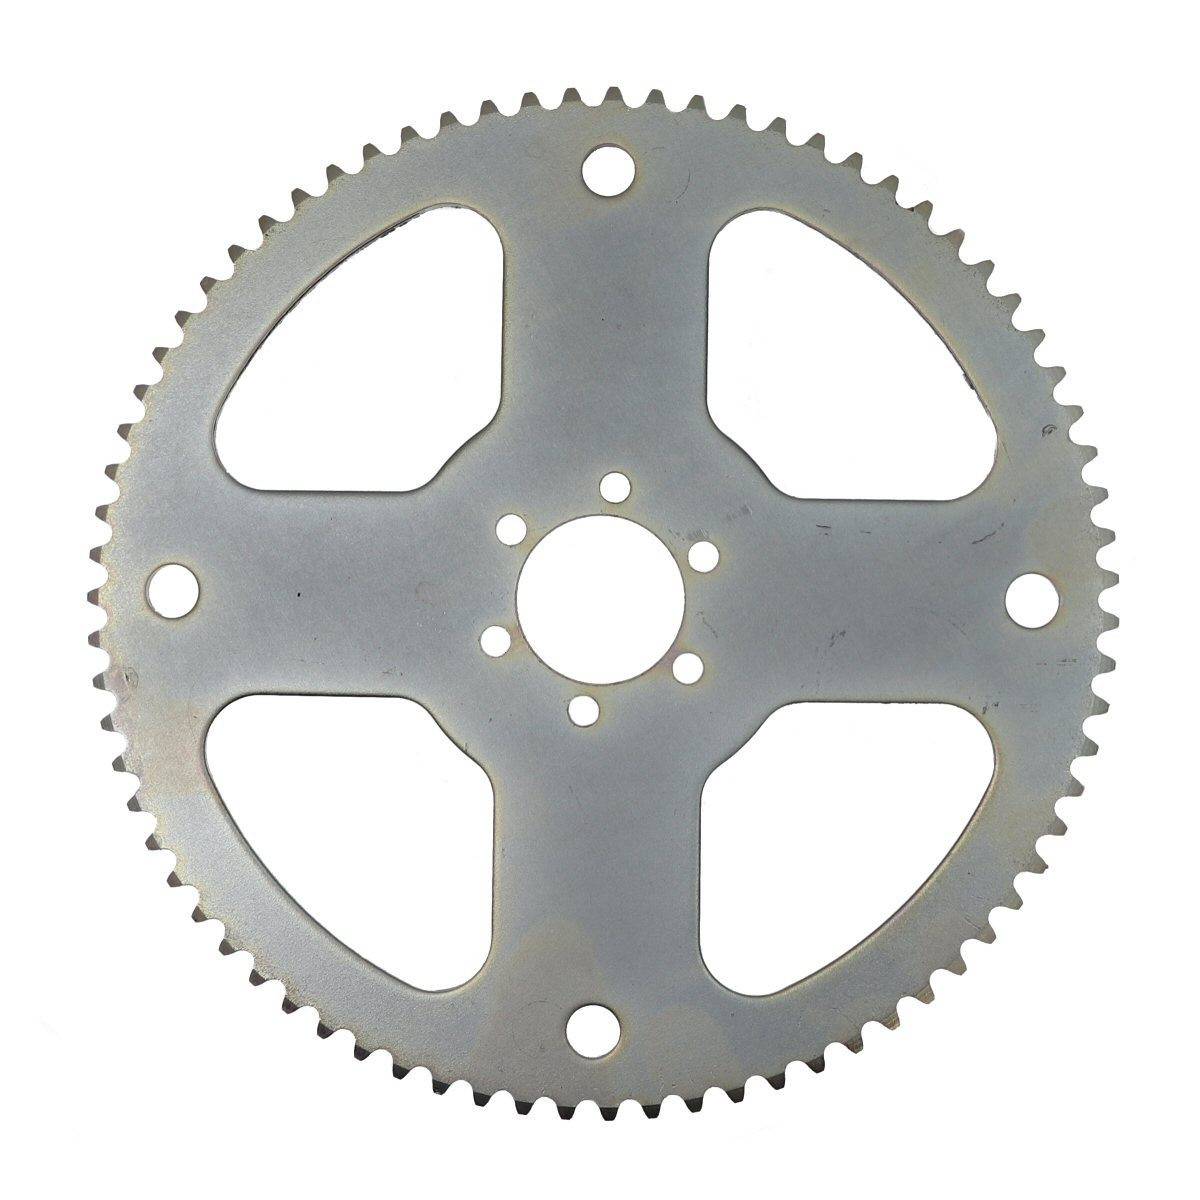 Universal Parts 75 Tooth Sprocket for Mini Bikes with #35 Chain